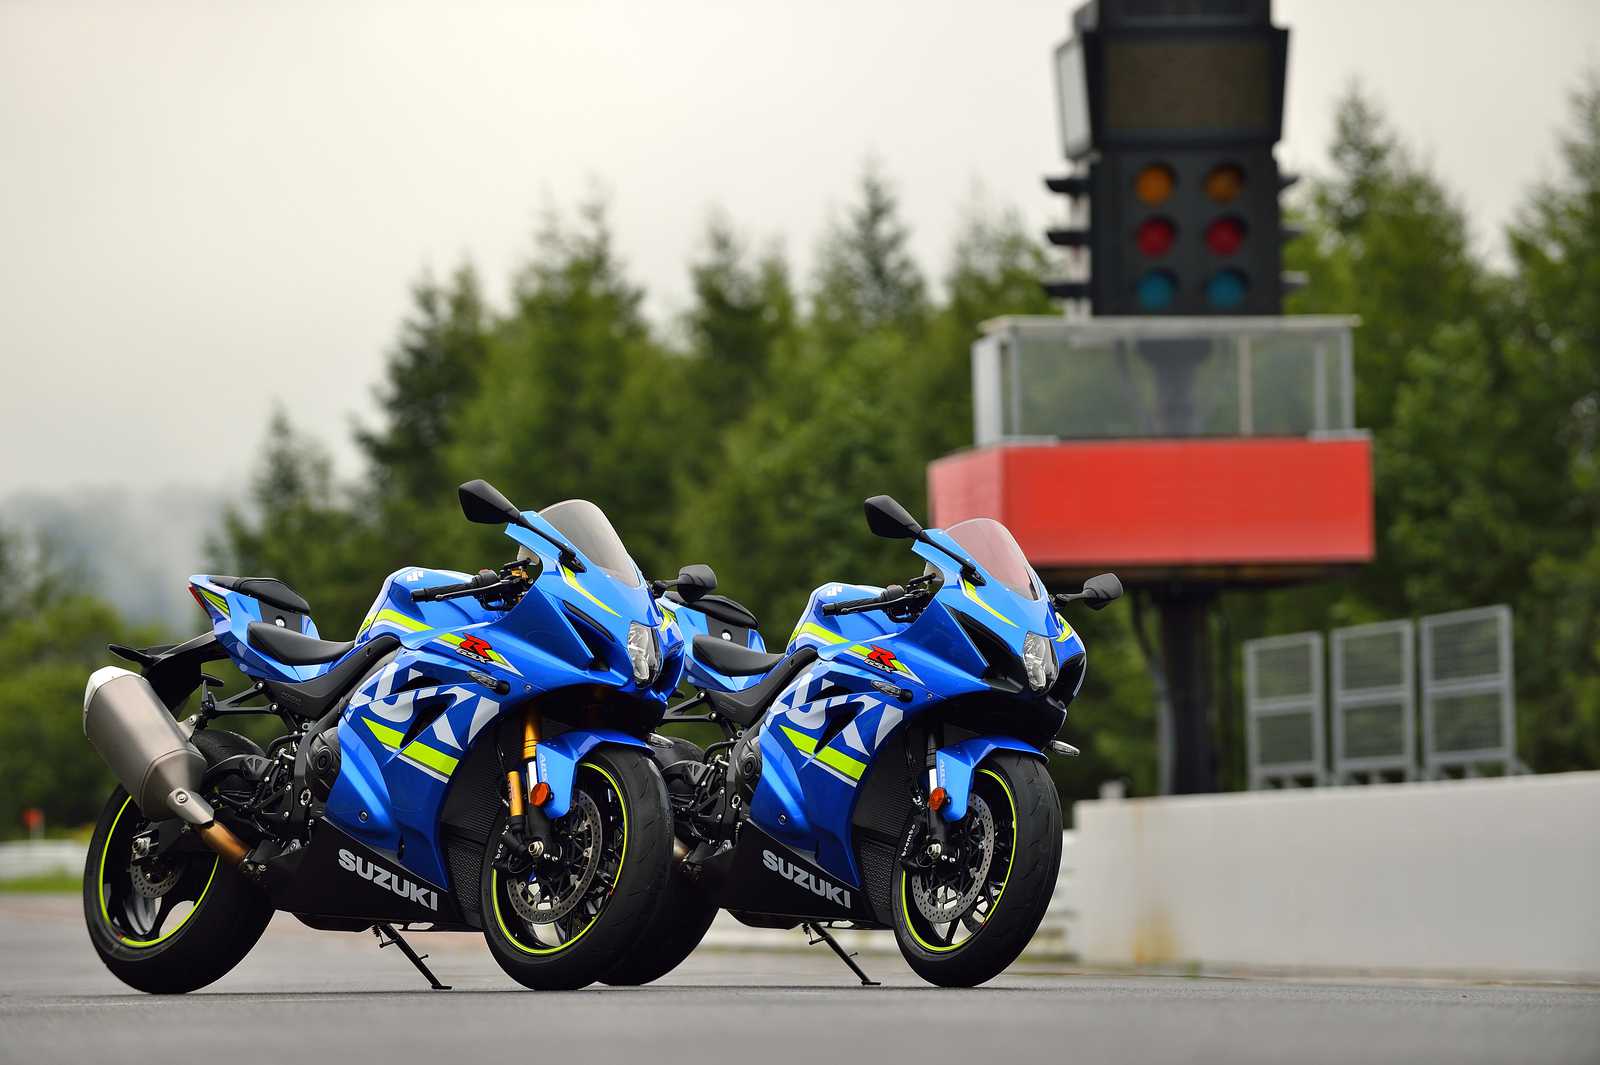 All New 17 Suzuki Gsx R1000 And Gsx R1000r Models Combining More Power With Imu Based Electronics Are Introduced Updated Roadracing World Magazine Motorcycle Riding Racing Tech News